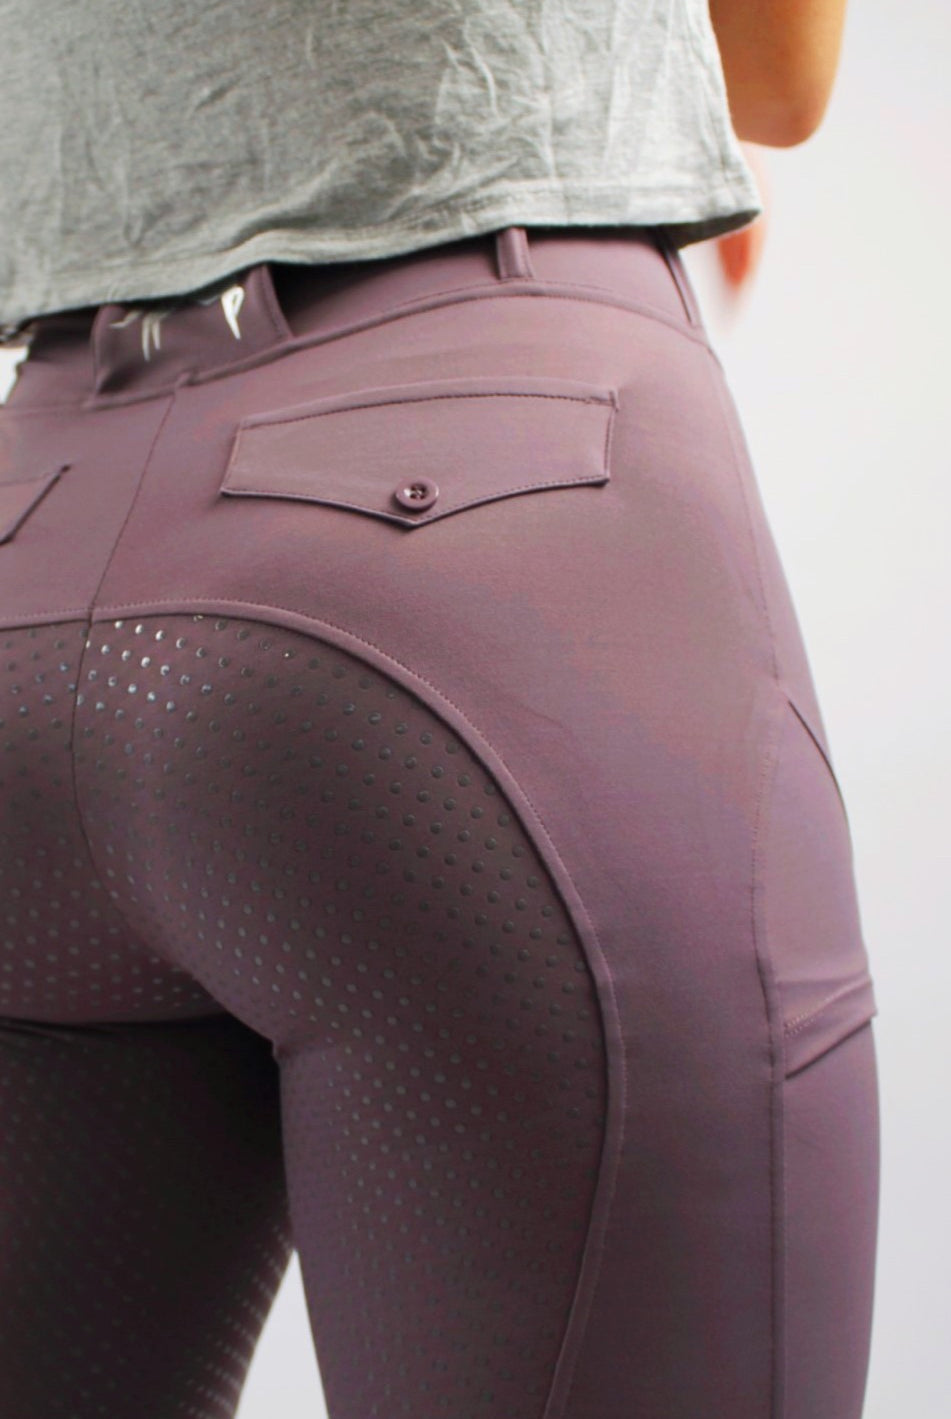 A person wearing Pure Canter's Fusion Tights - Plum with buttoned back pockets and a subtle dotted pattern on the rear area. The image is focused on the lower back and waist area of the tights, which feature moisture-wicking fabric. The top of a grey shirt is partially visible.